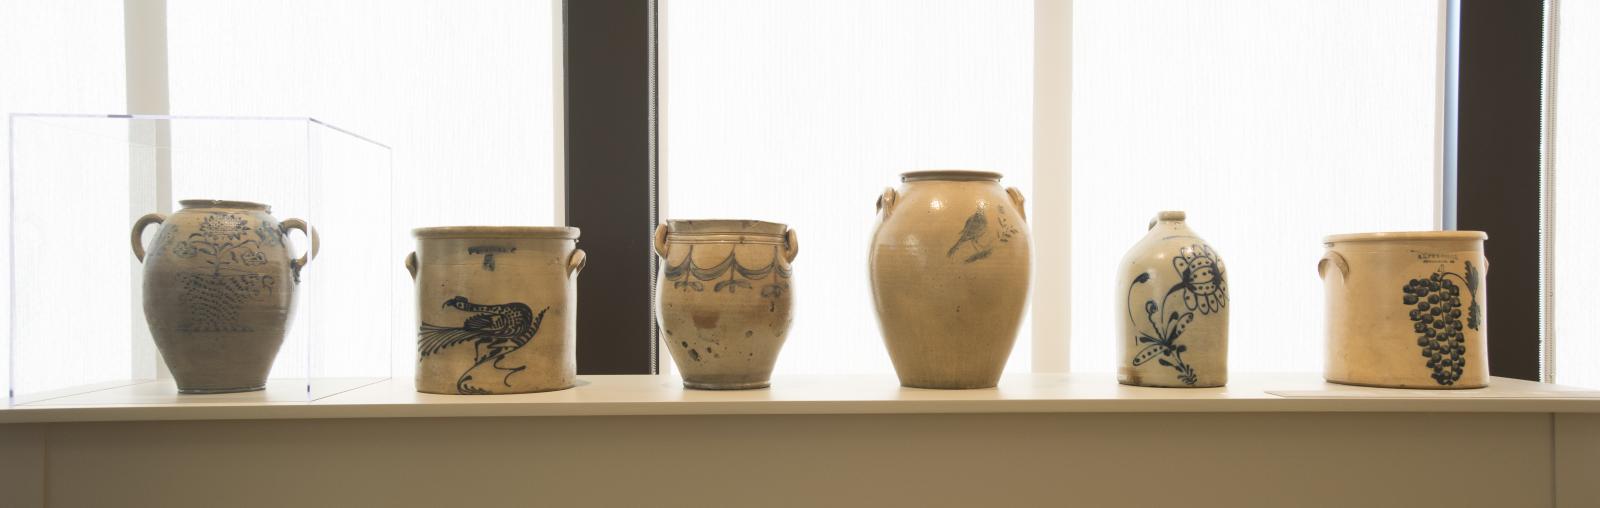 Six large ceramic jars with different blue painted details are displayed on a long table in front of a windowed wall.